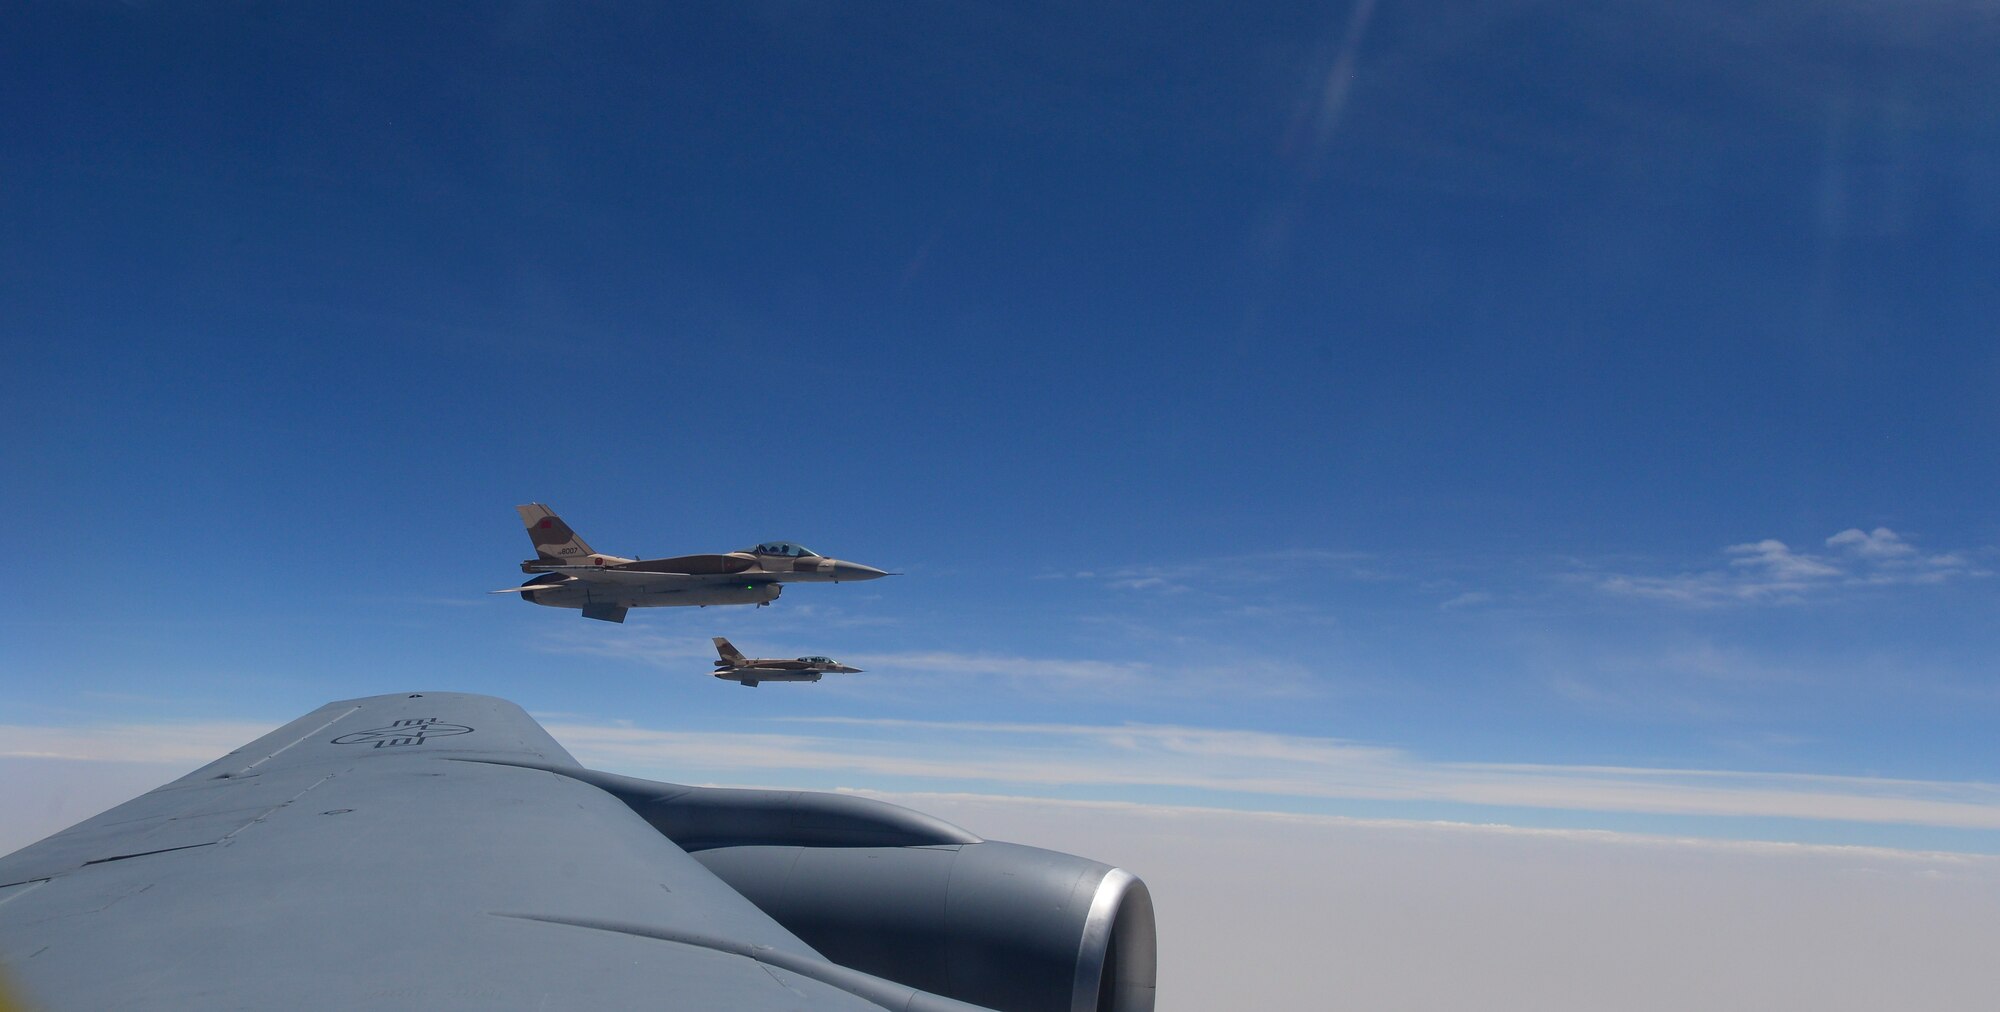 Moroccan F-16 Fighting Falcons fly off the wing of a U.S. Air Force KC-135 Stratotanker assigned to the 100th Air Refueling Wing from RAF Mildenahall, England, over Morocco, during exercise African Lion on April 18, 2017. African Lion is a multinational exercise focused on enhancing professional relationships and strengthening regional security. (U.S. Air Force photo by Staff Sgt. Micaiah Anthony)
